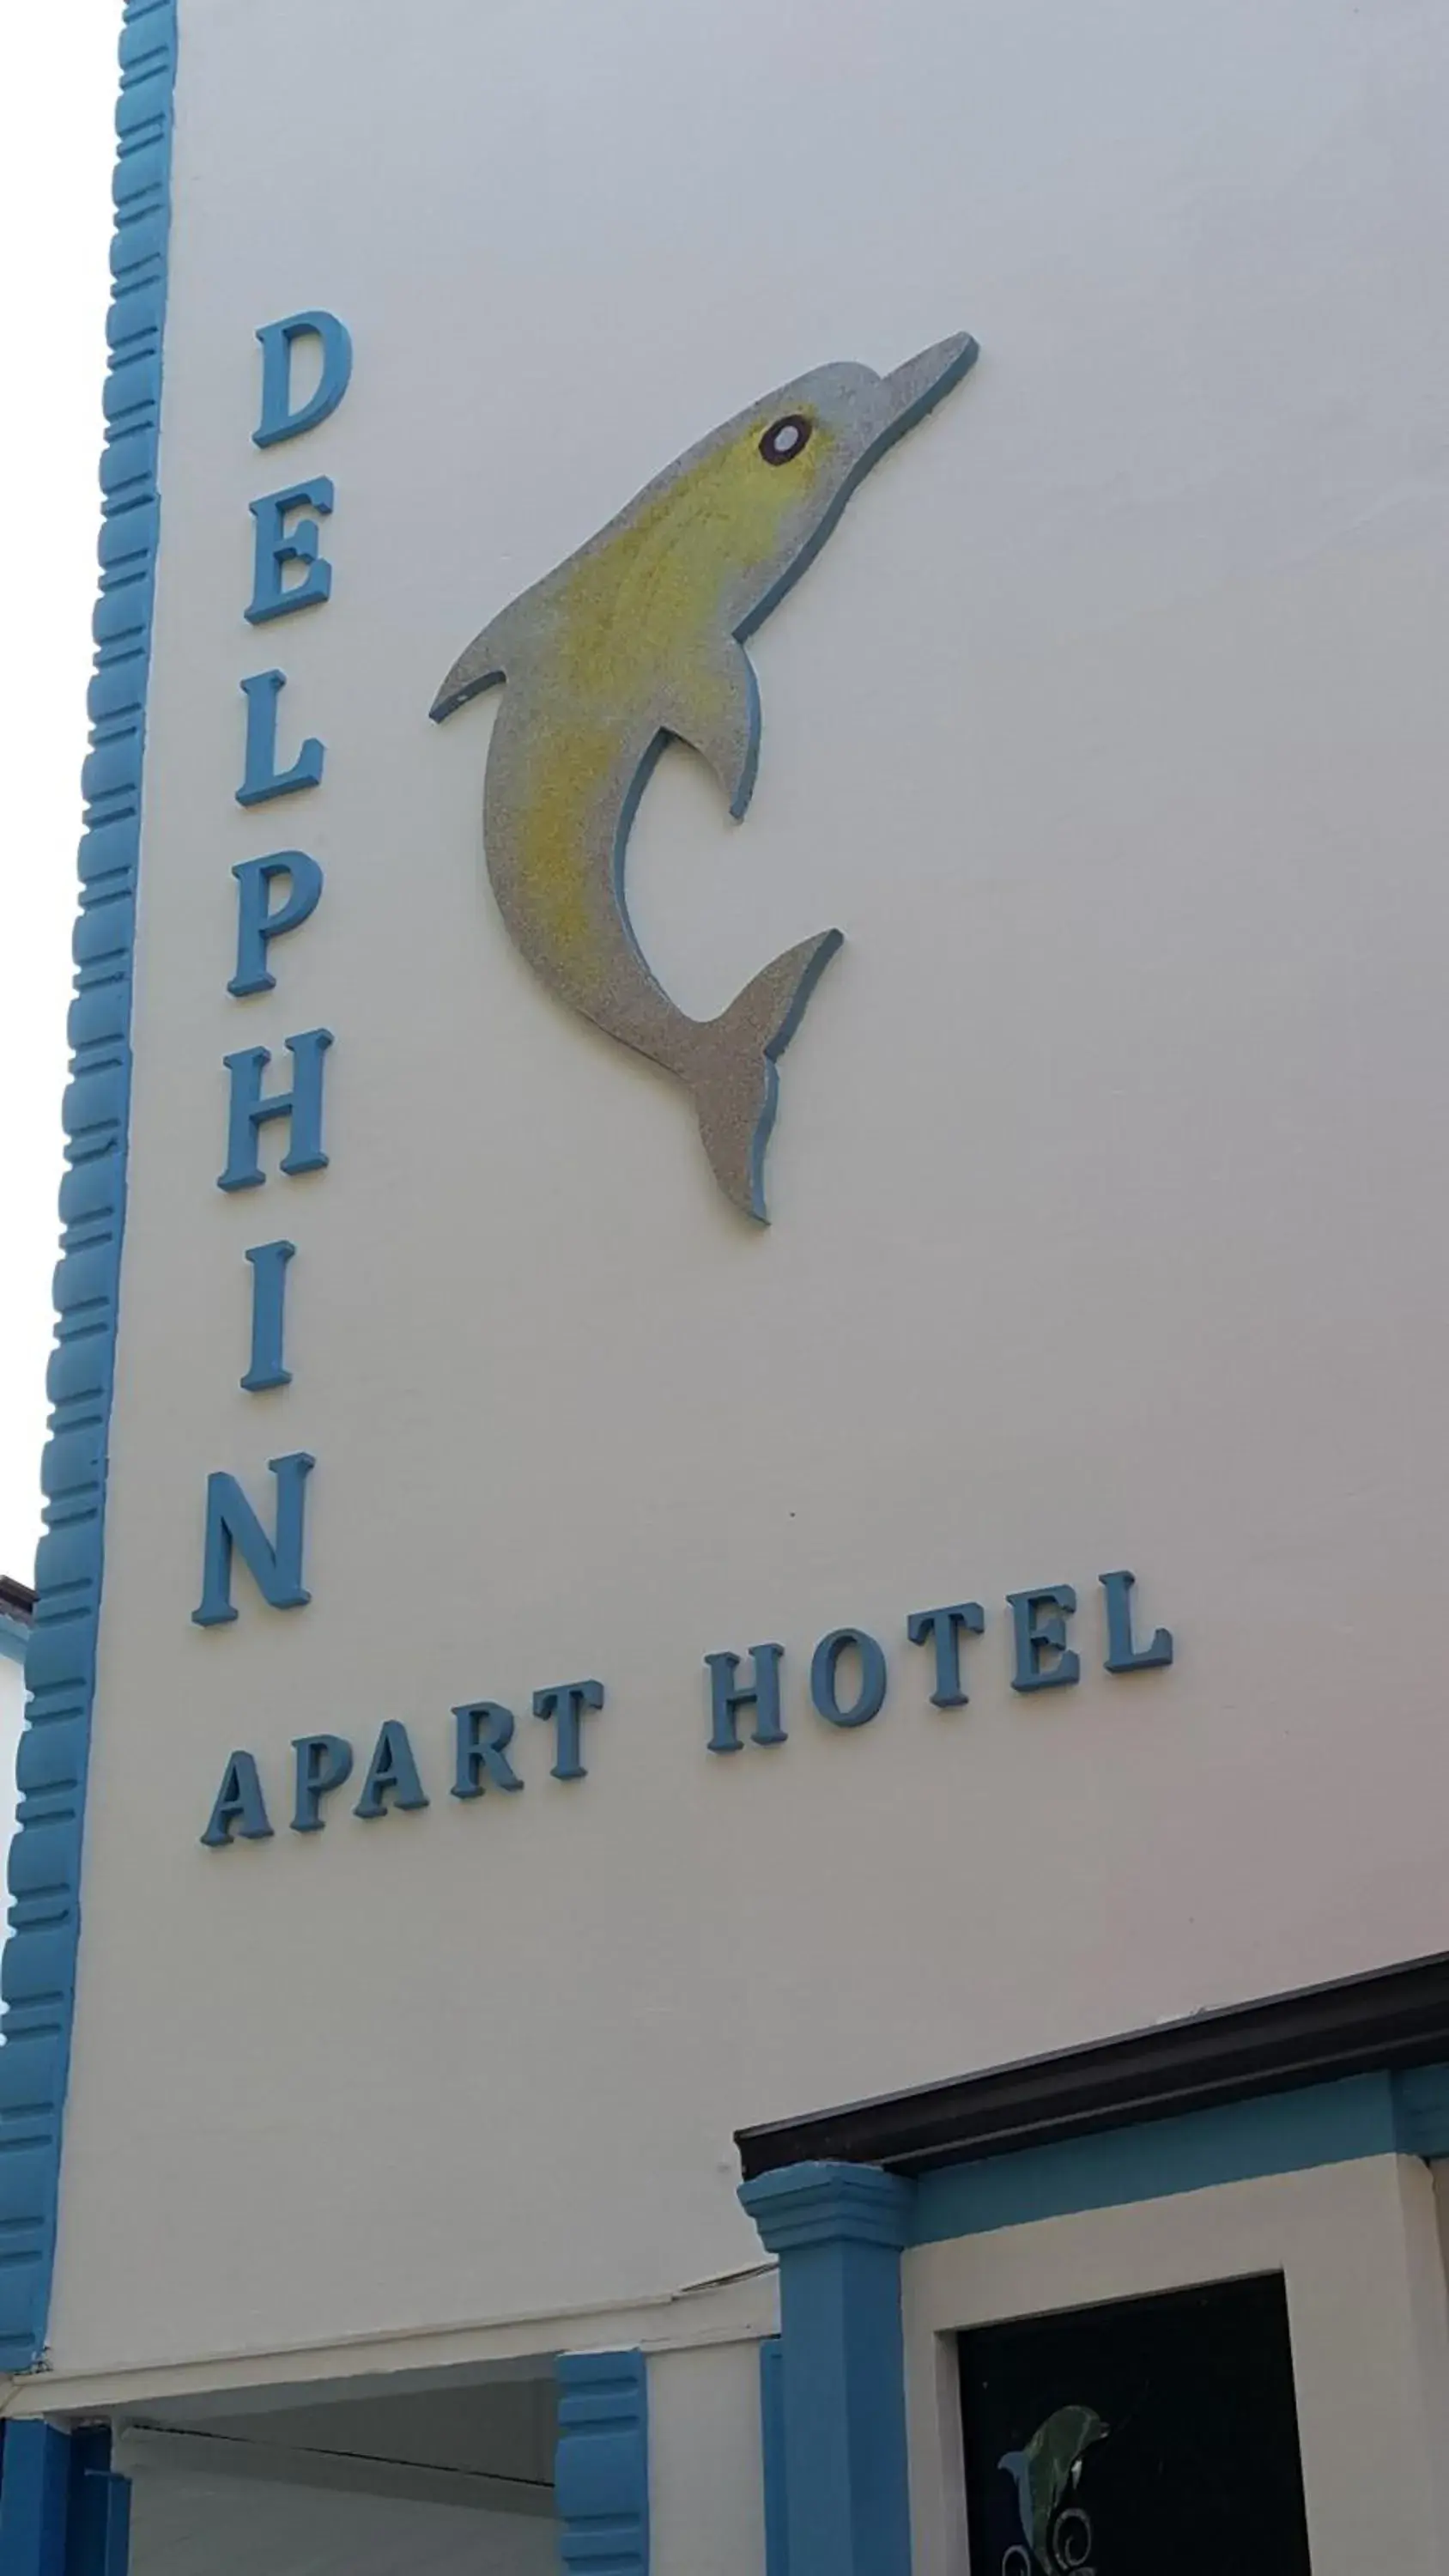 Property logo or sign in Delphin Apart Hotel